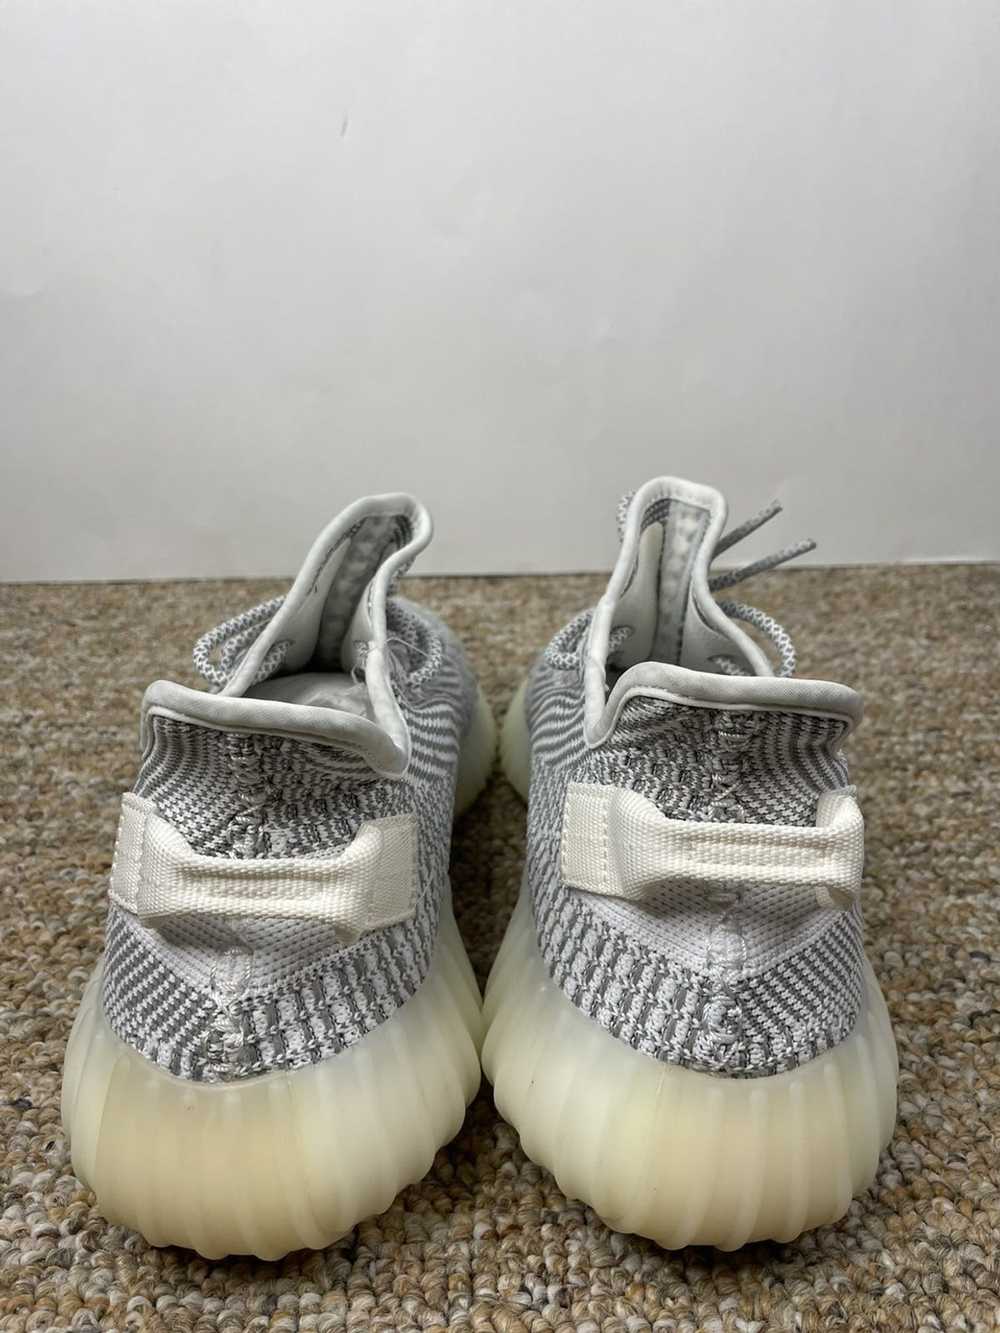 Adidas Yeezy Boost 350 V2 Static Non Reflective - image 5